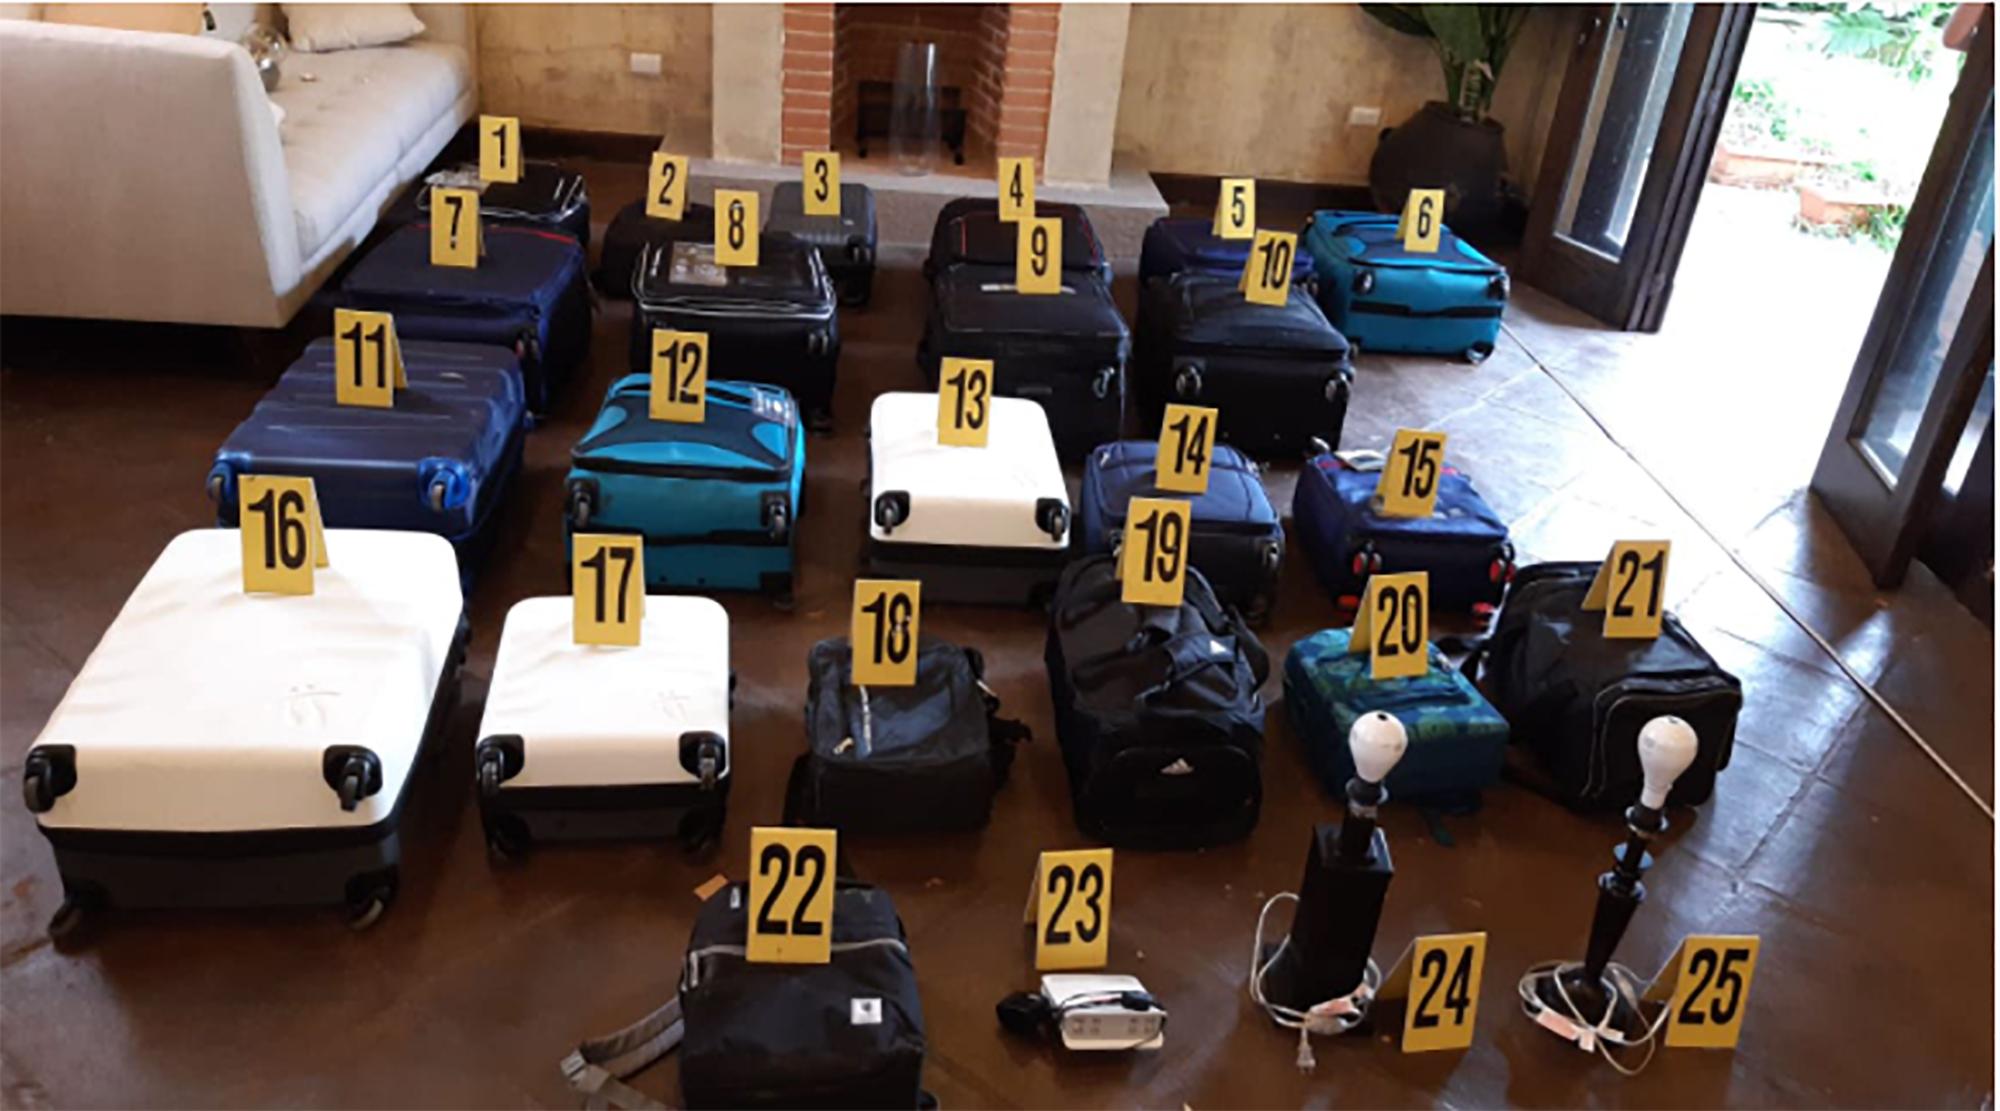 22 suitcases stuffed with cash. Photo from the Guatemalan Attorney General